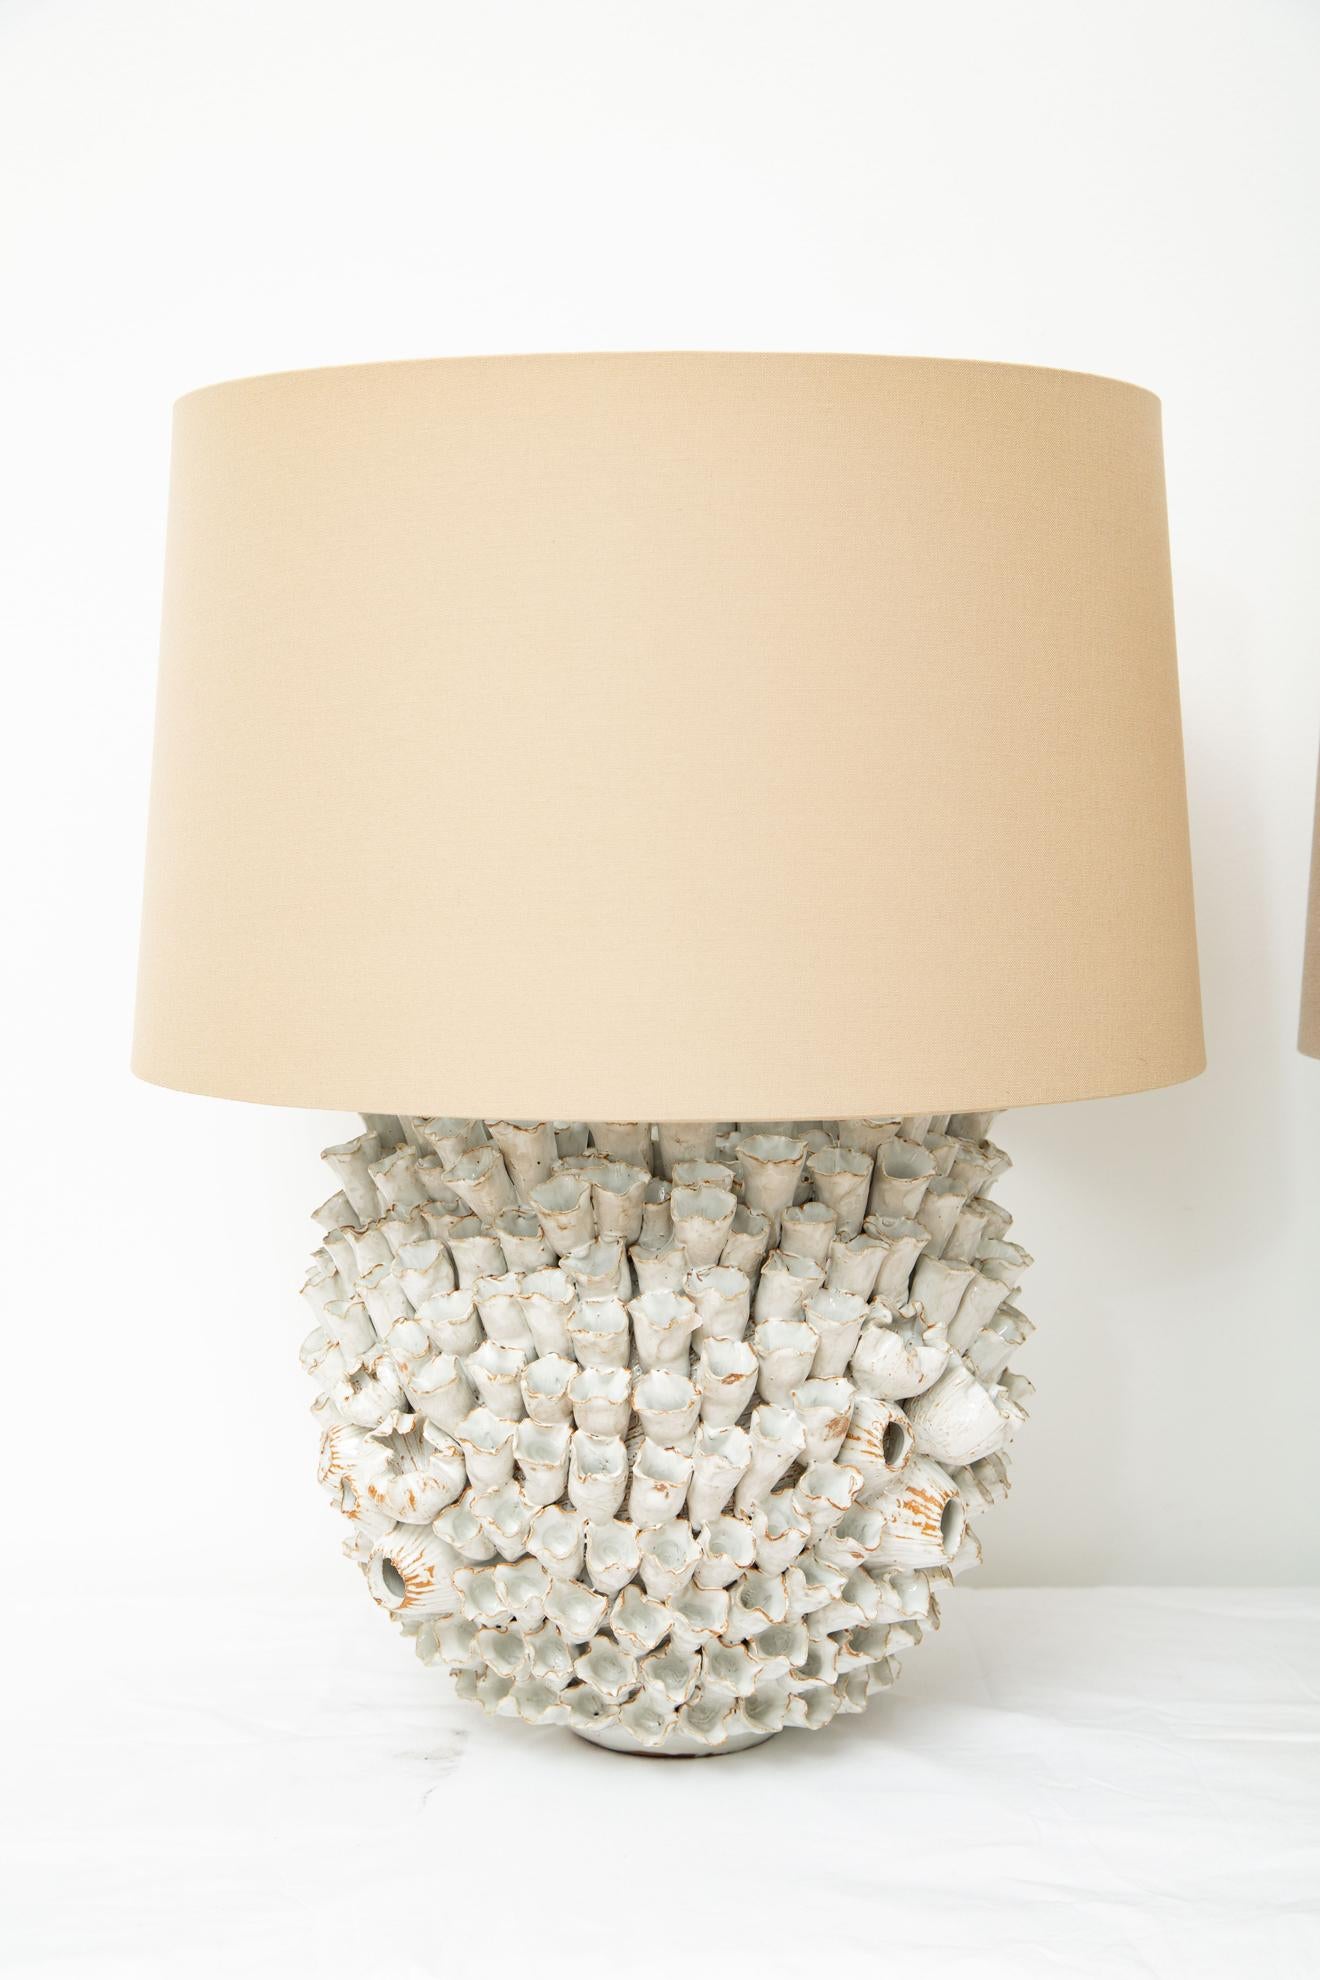 Pair of hand-crafted coral ceramic table lamps, in stock
Base is 12